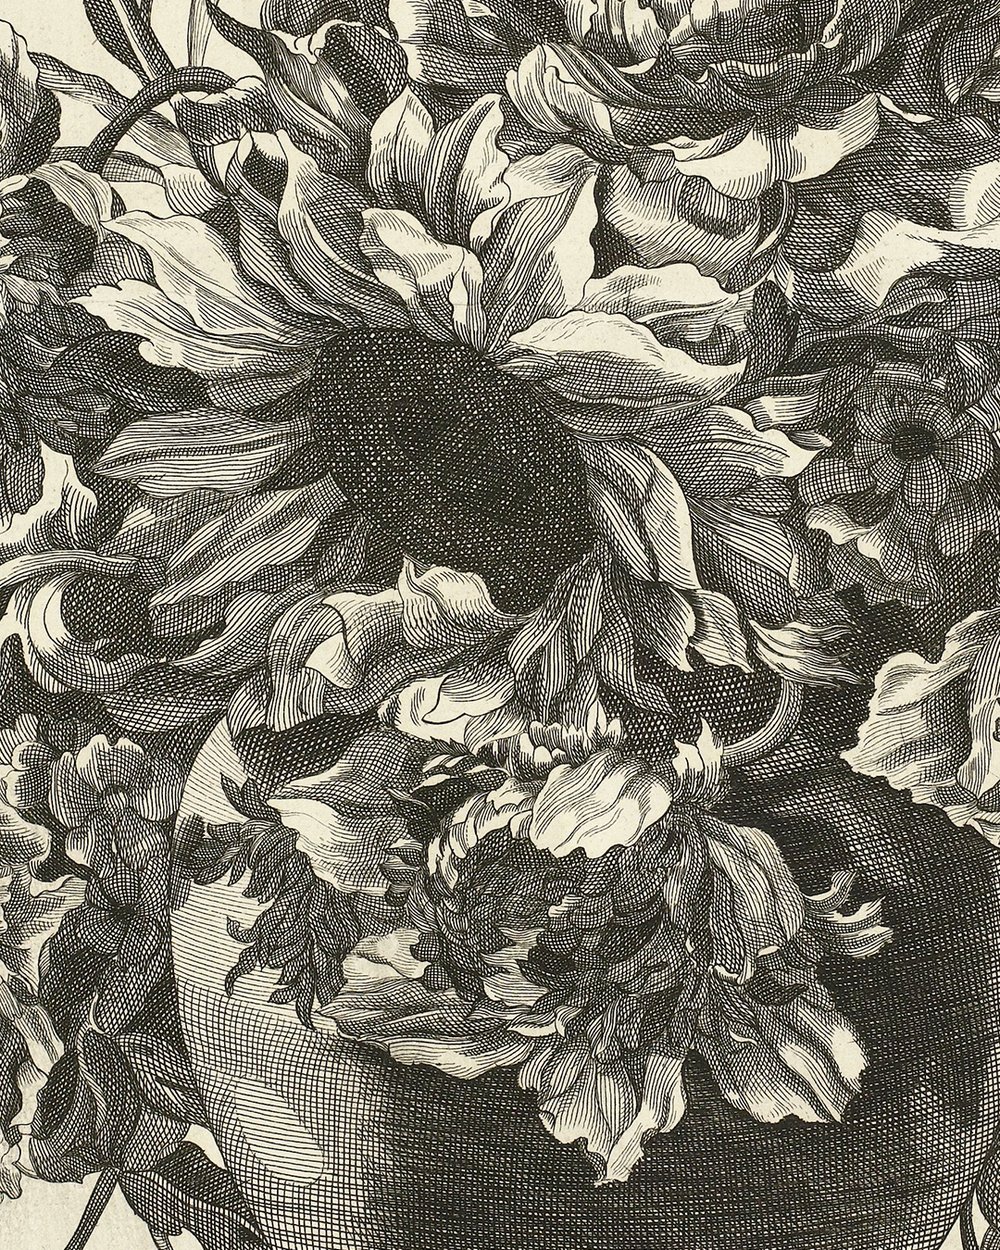 ''Vase with sunflower and other flowers'' (1690 - 1700)